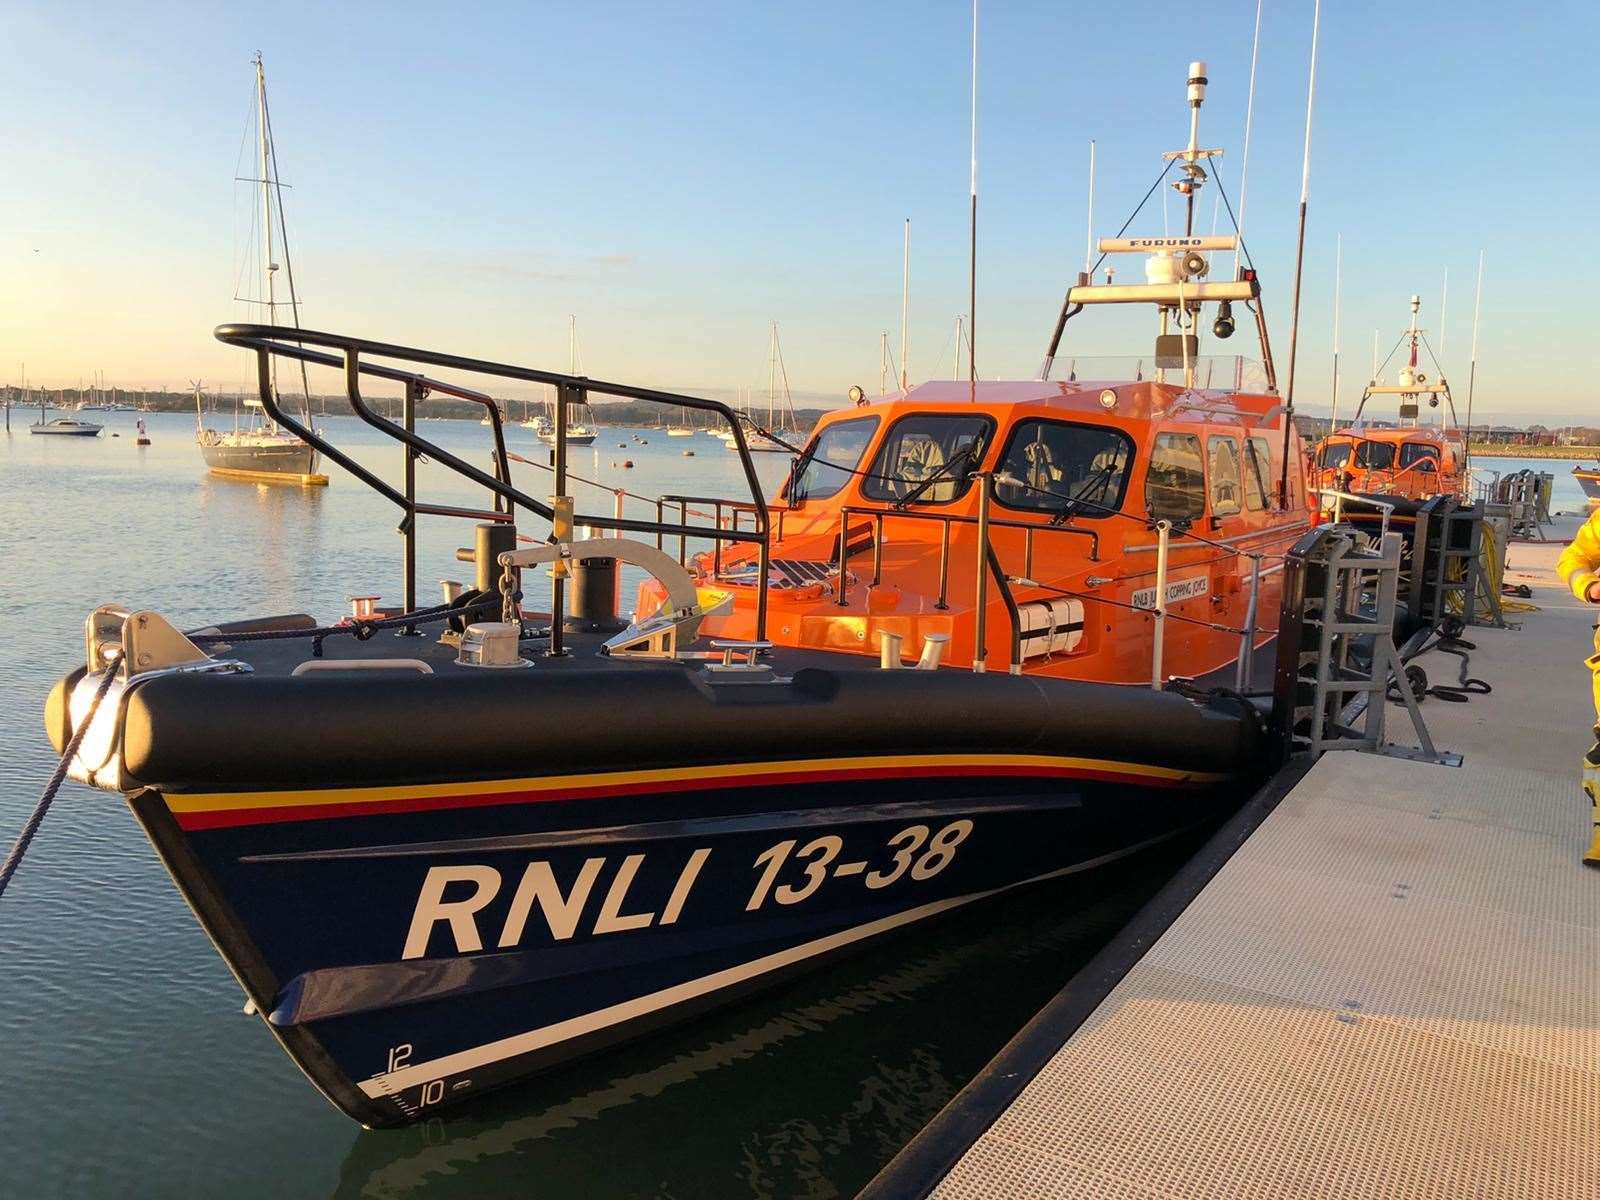 The new Sheerness RNLI lifeboat the Judith Copping Joyce undergoing sea trials at Poole, Dorset